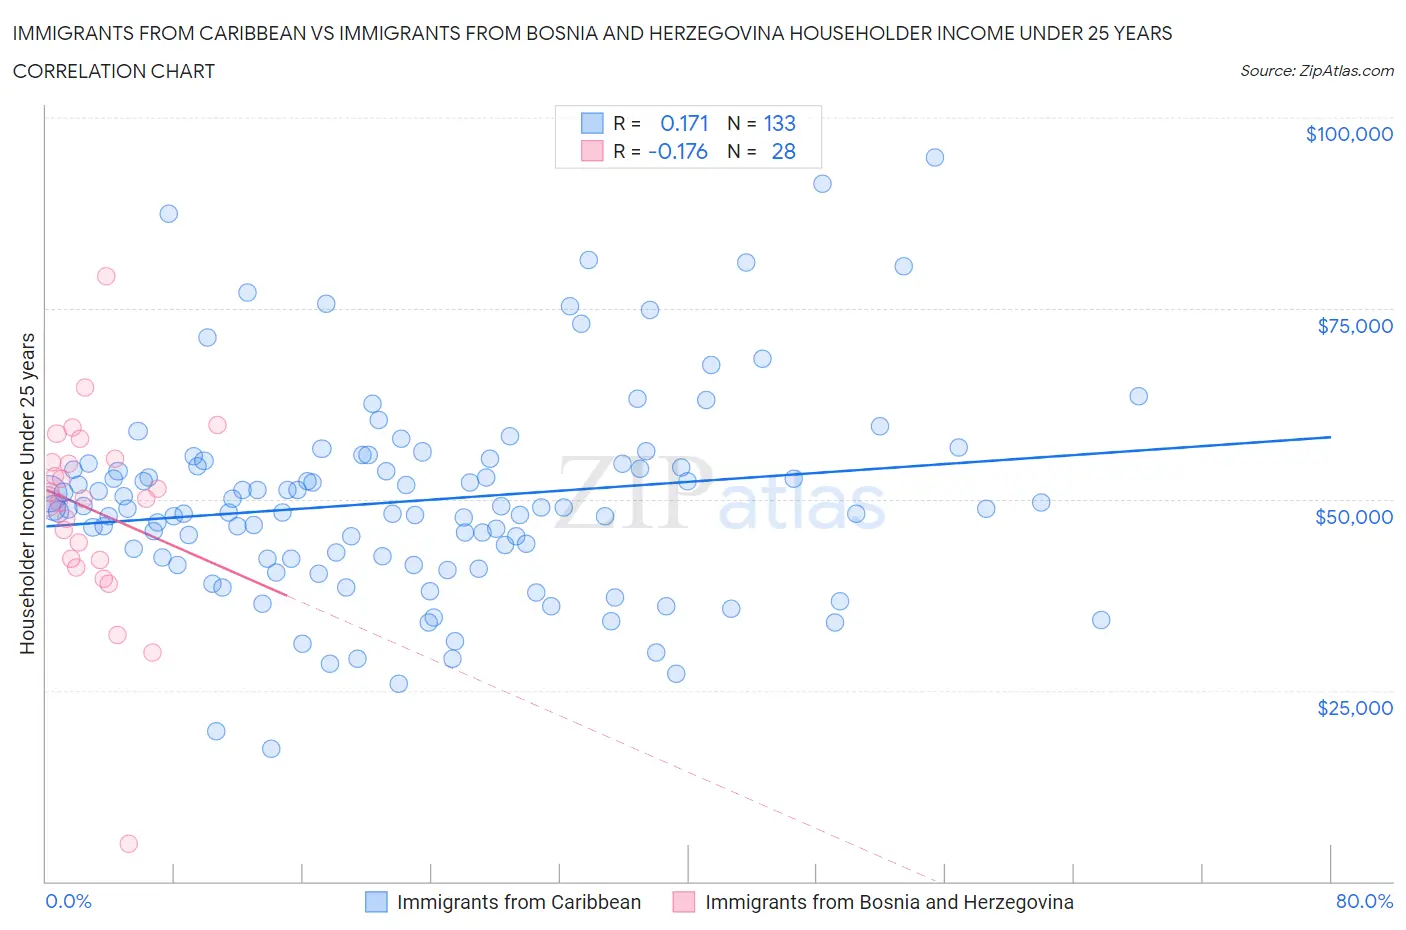 Immigrants from Caribbean vs Immigrants from Bosnia and Herzegovina Householder Income Under 25 years